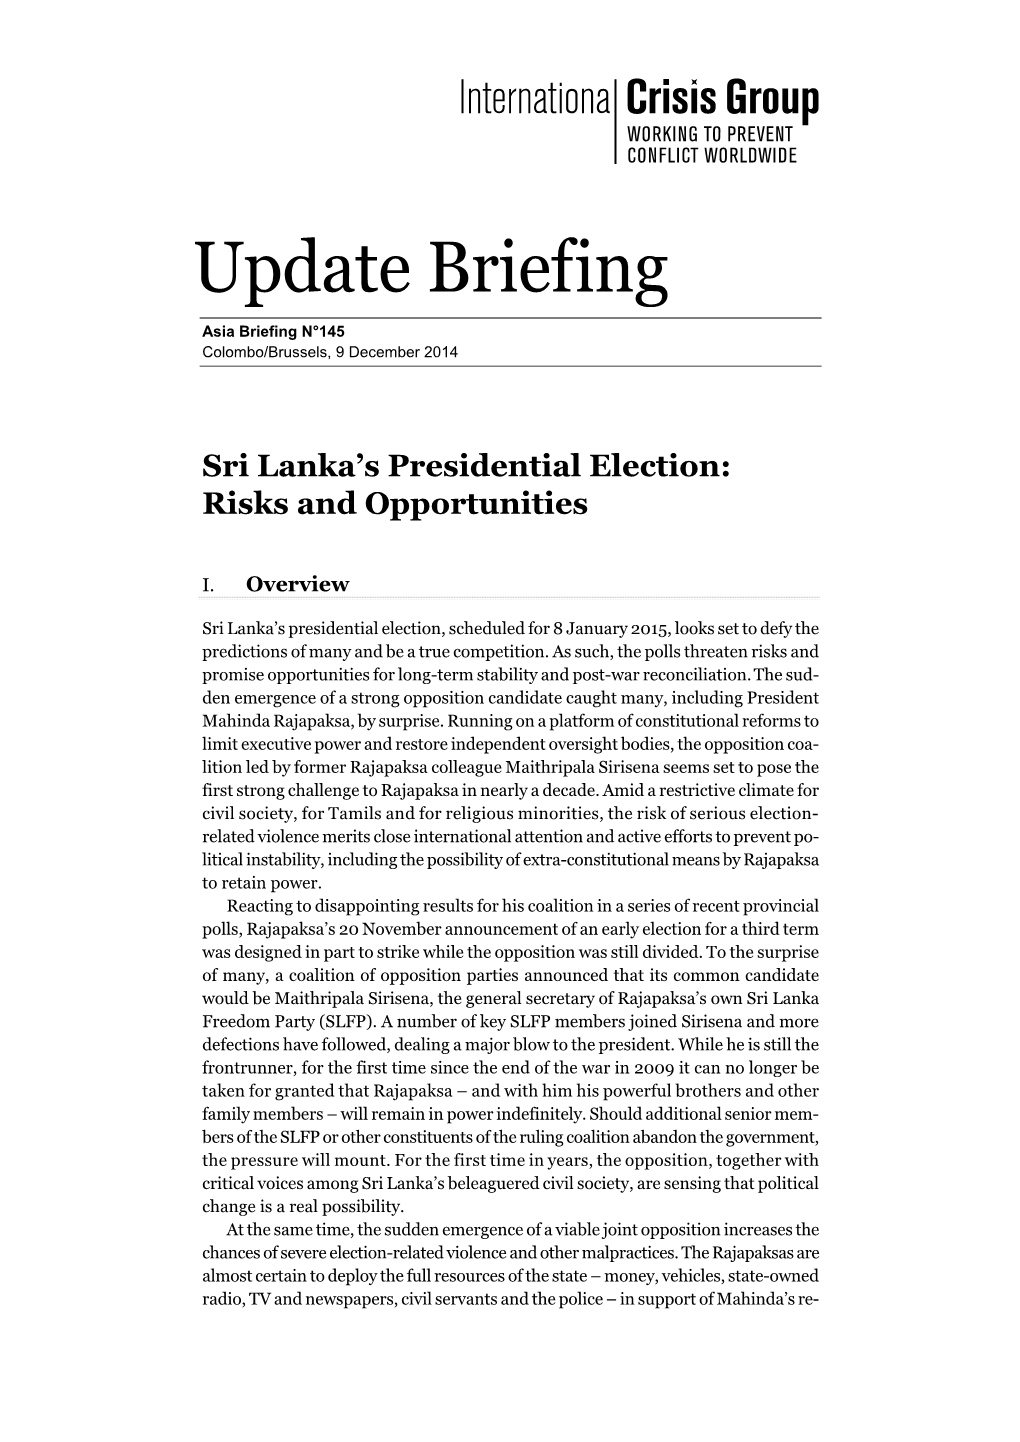 Sri Lanka's Presidential Election: Risks and Opportunities